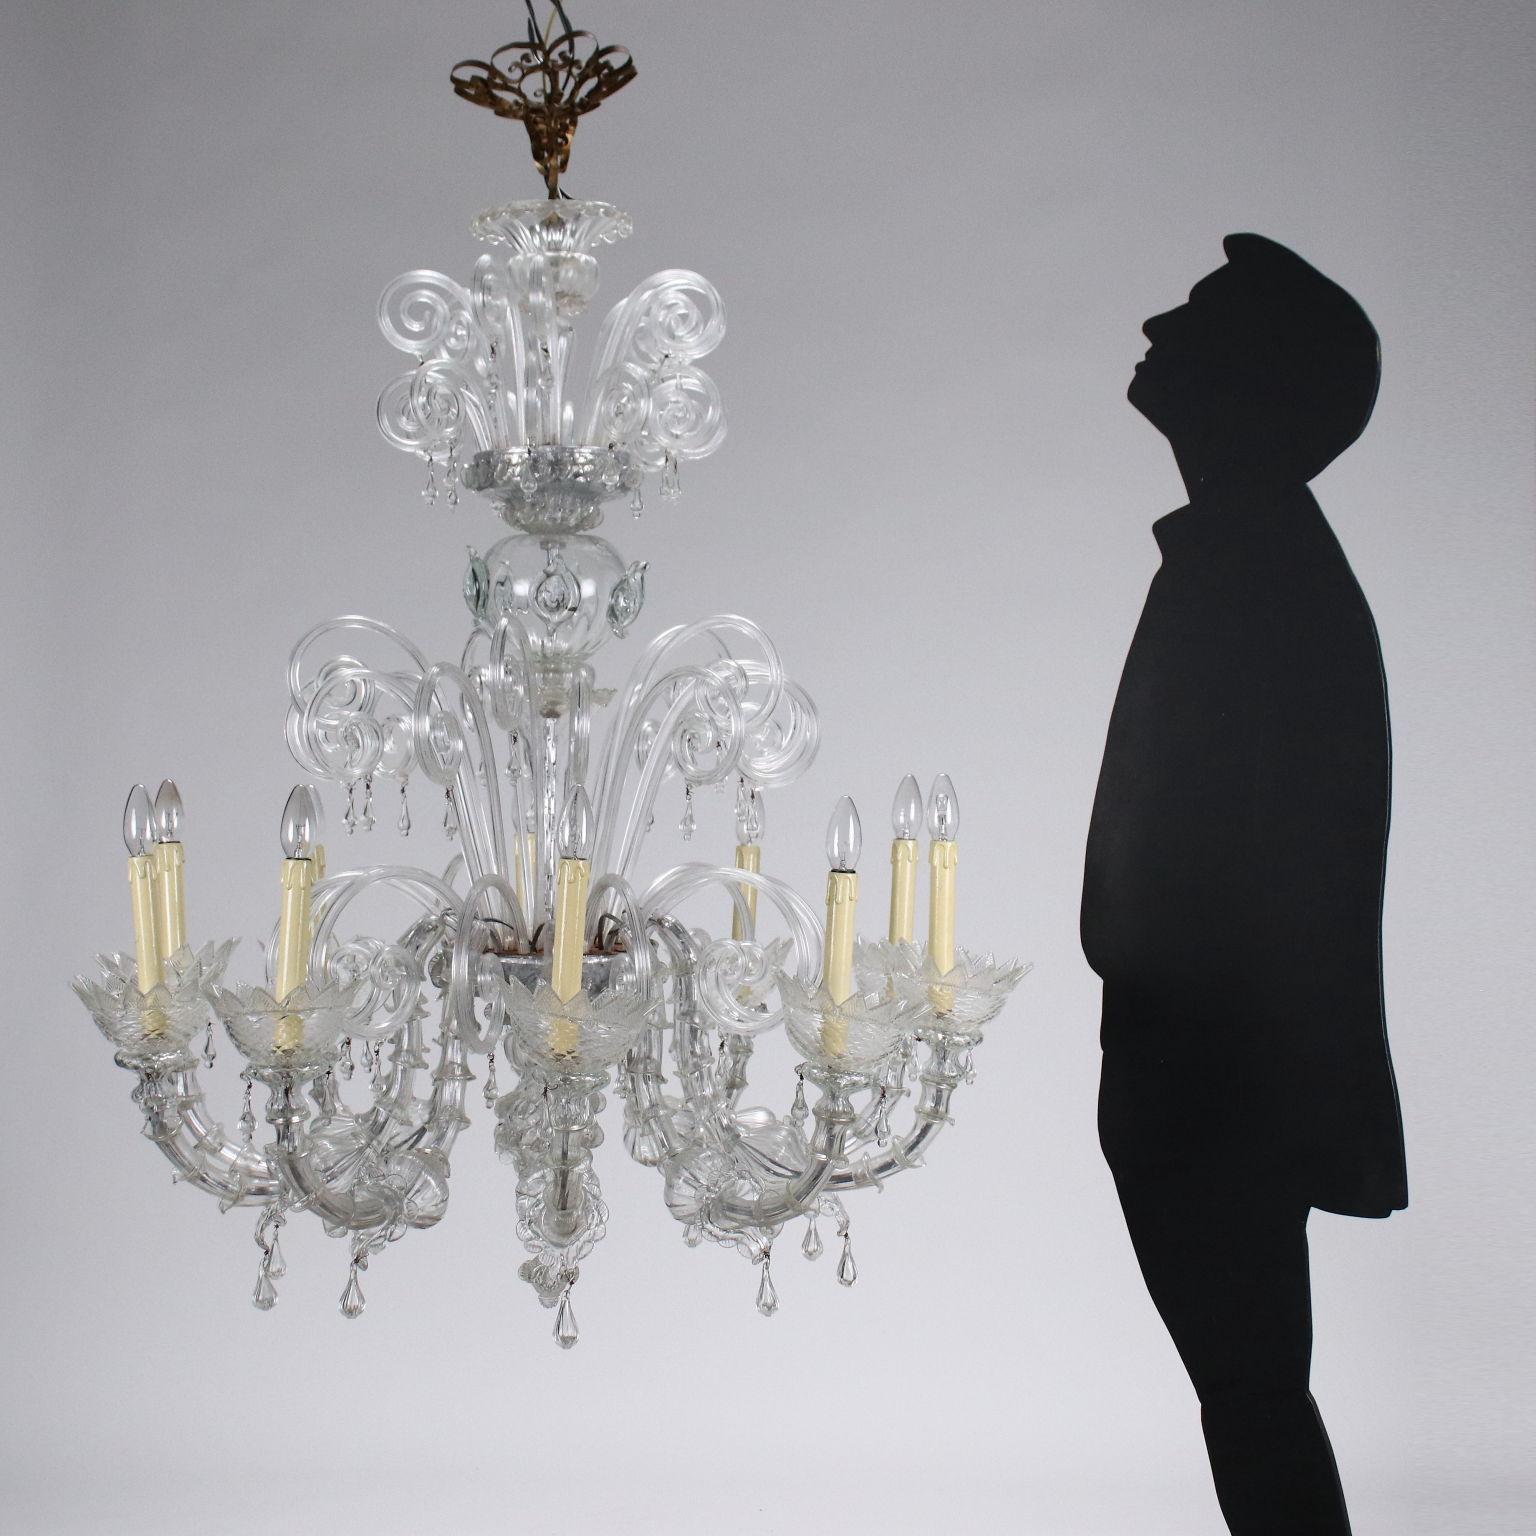 Pastoral Murano chandelier with 10 lights, Italy mid-20th century. Blown glass structure and pendants.